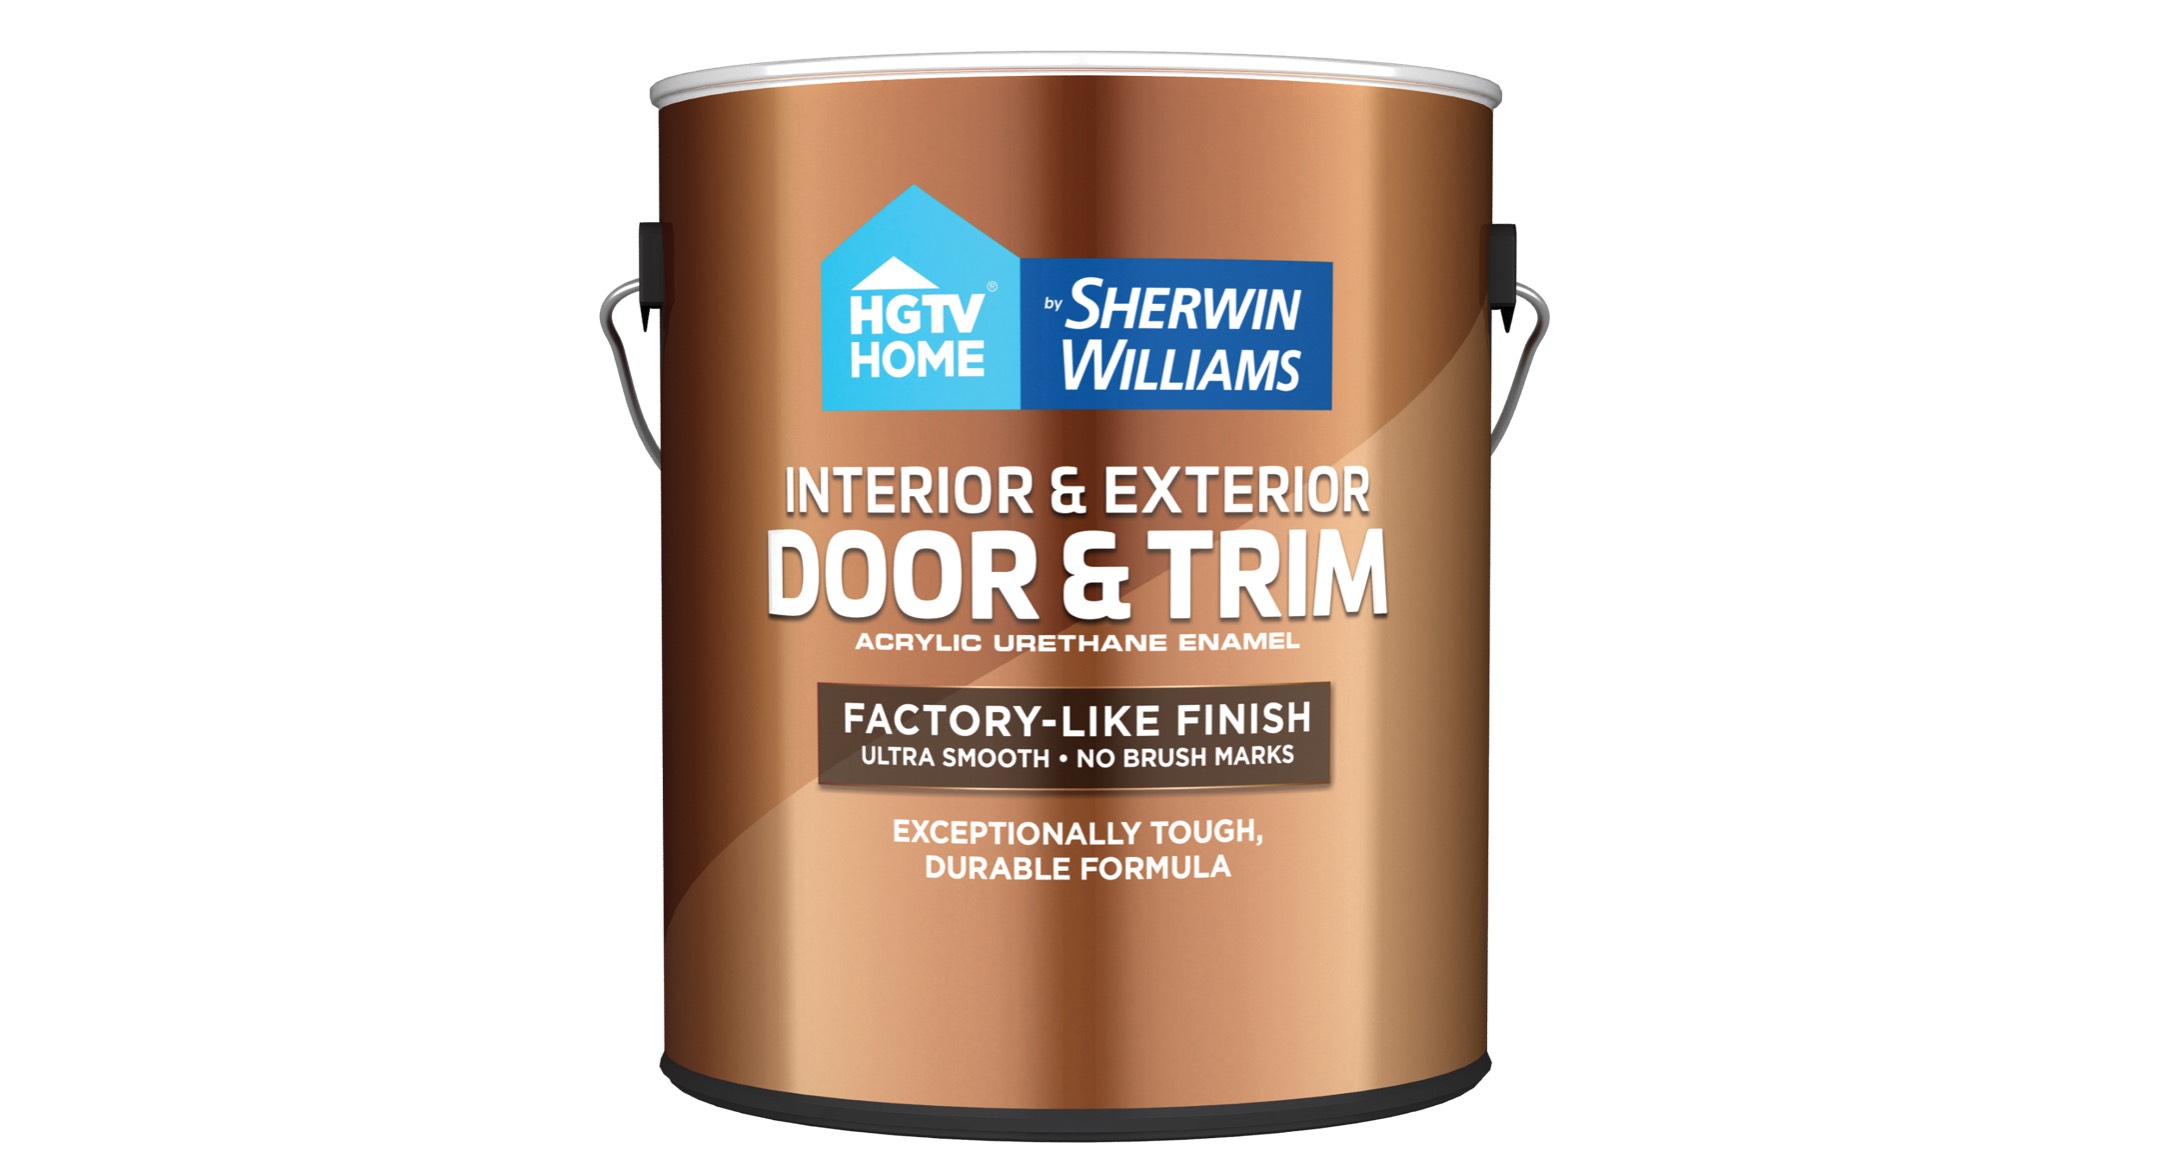 HGTV Home by Sherwin-Williams Introduces New-and-Improved Paint Products